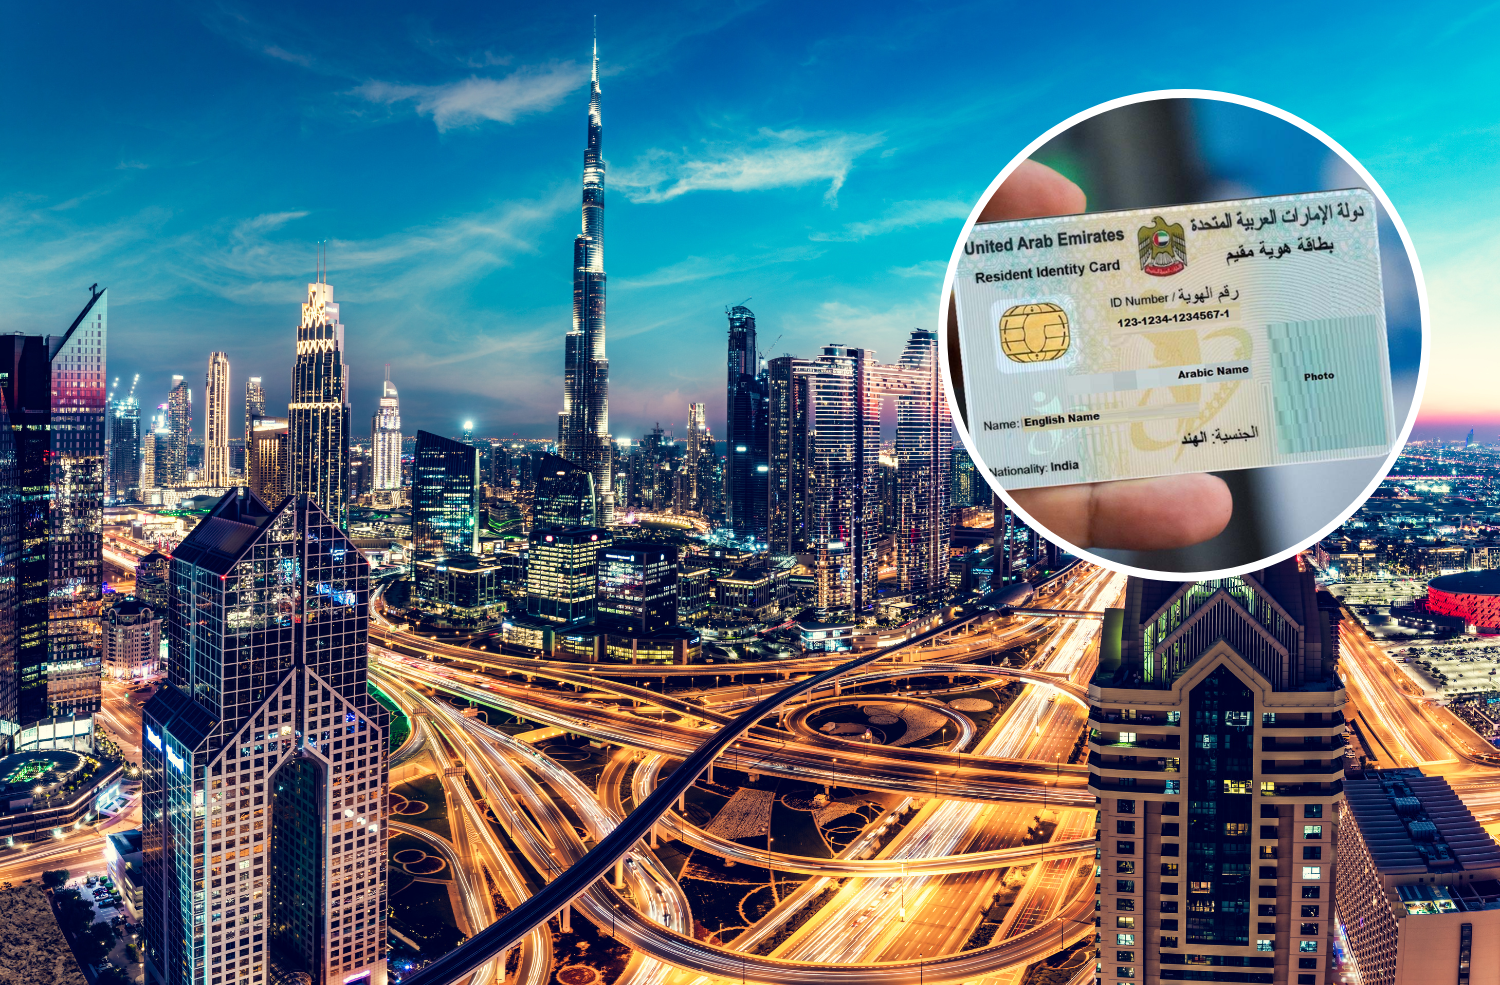 6 Easy Steps to Replace Your Lost Emirates ID in Dubai